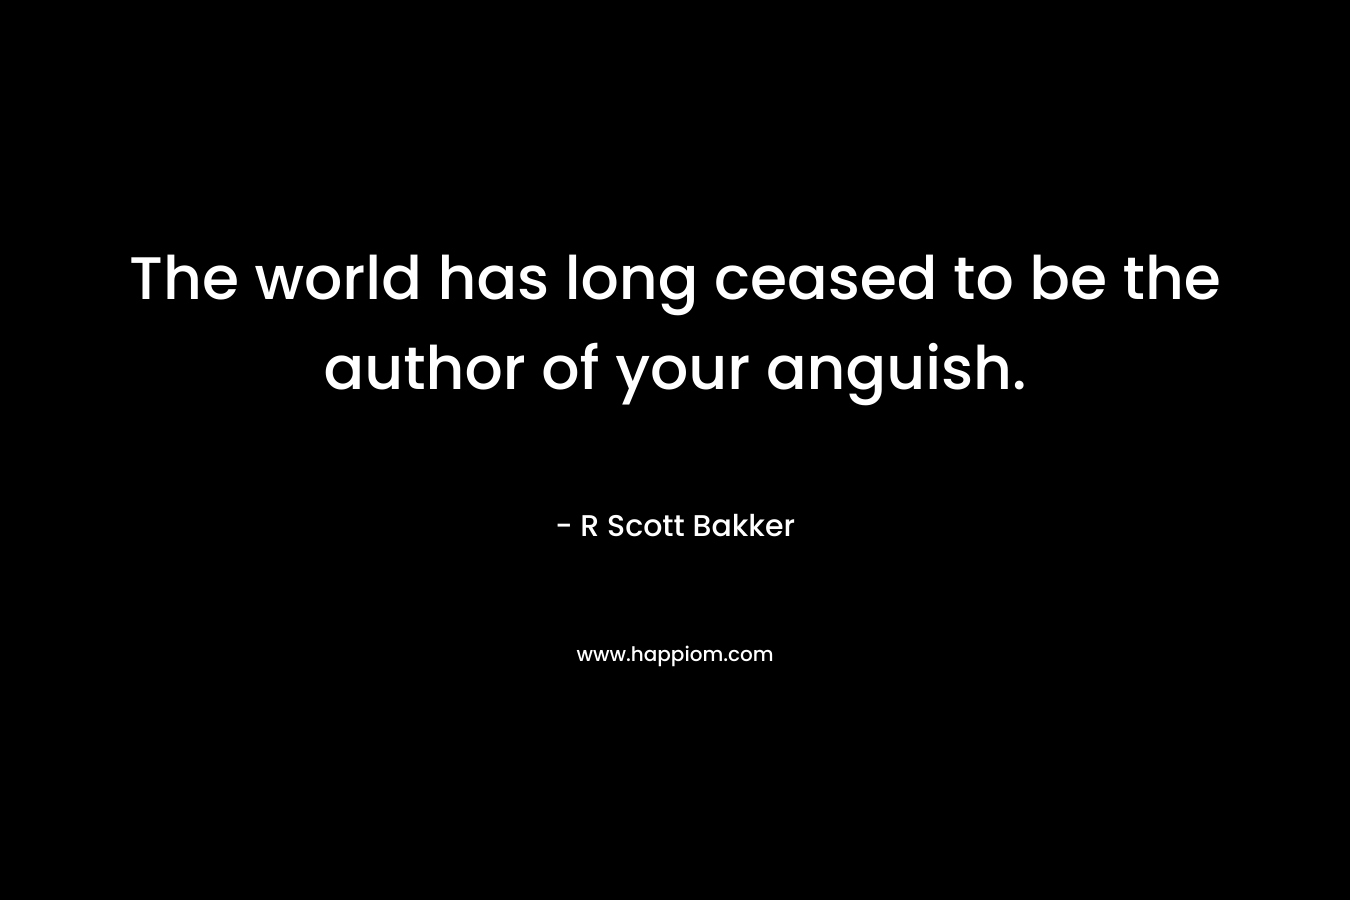 The world has long ceased to be the author of your anguish. – R Scott Bakker